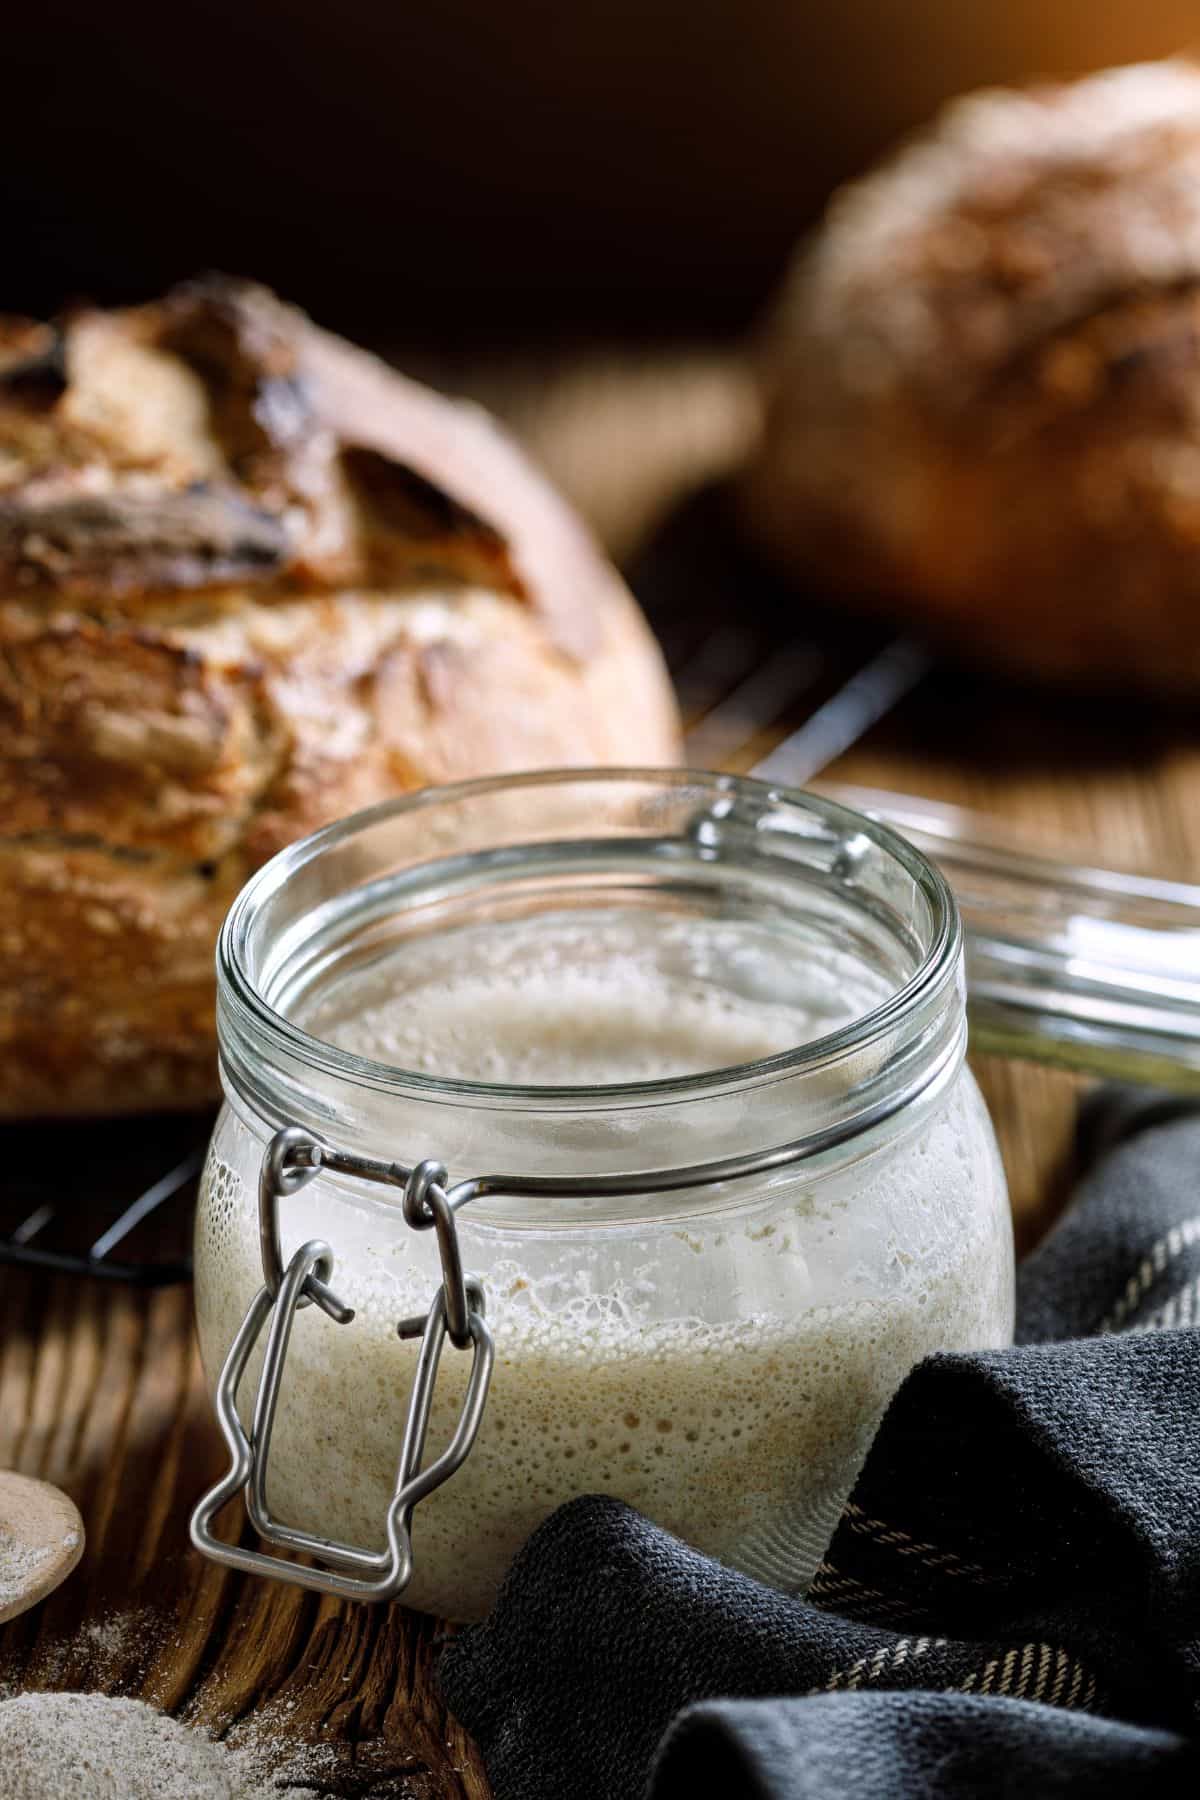 Glass jar containing traditional sourdough starter, with a loaf of freshly baked bread in the background.